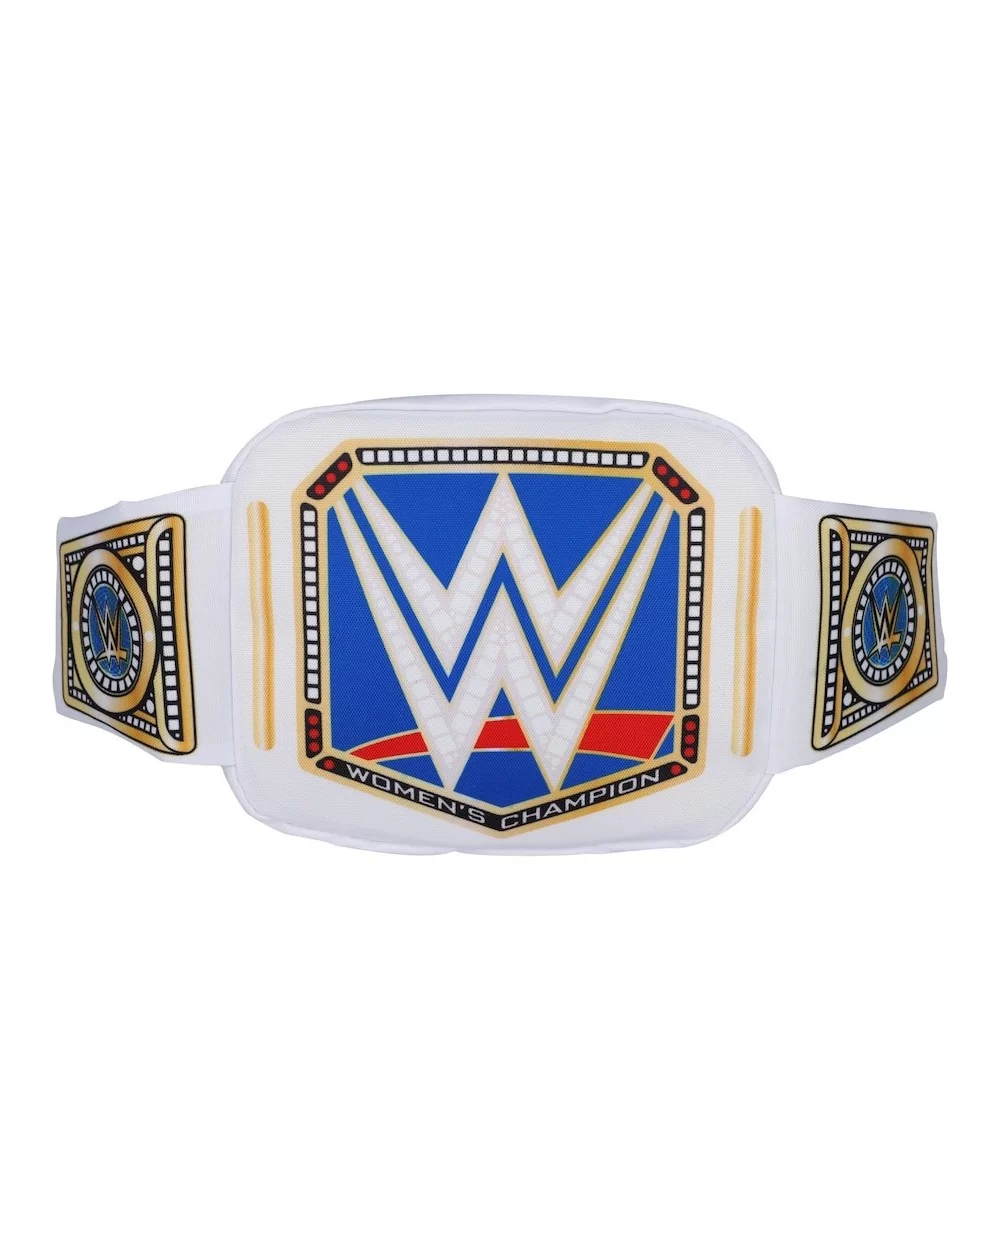 SmackDown Women's Championship Fanny Pack $6.56 Accessories